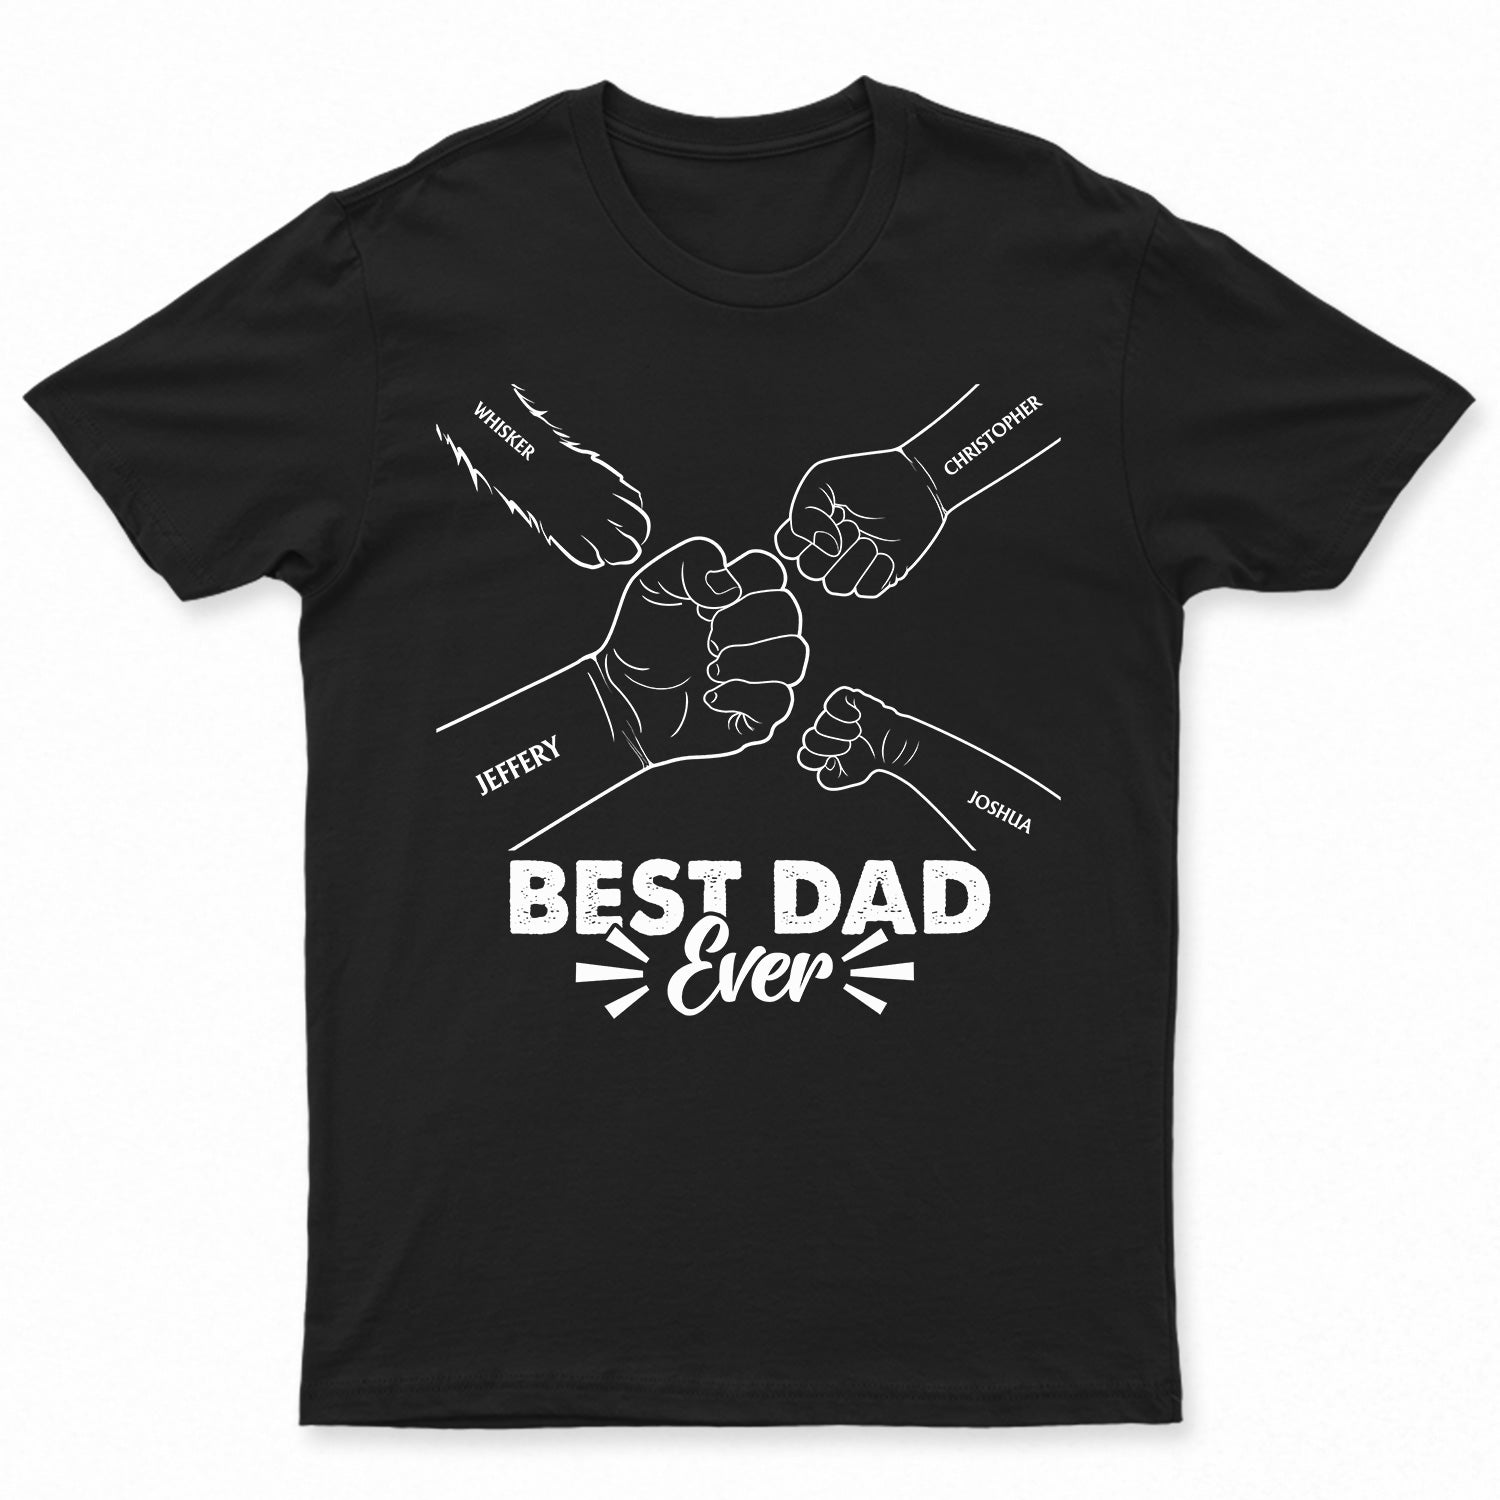 Best Dad Ever - Birthday, Loving Gift For Dad, Father, Grandpa, Grandfather, Dog, Cat Lover, Mother, Parents - Personalized Custom T Shirt